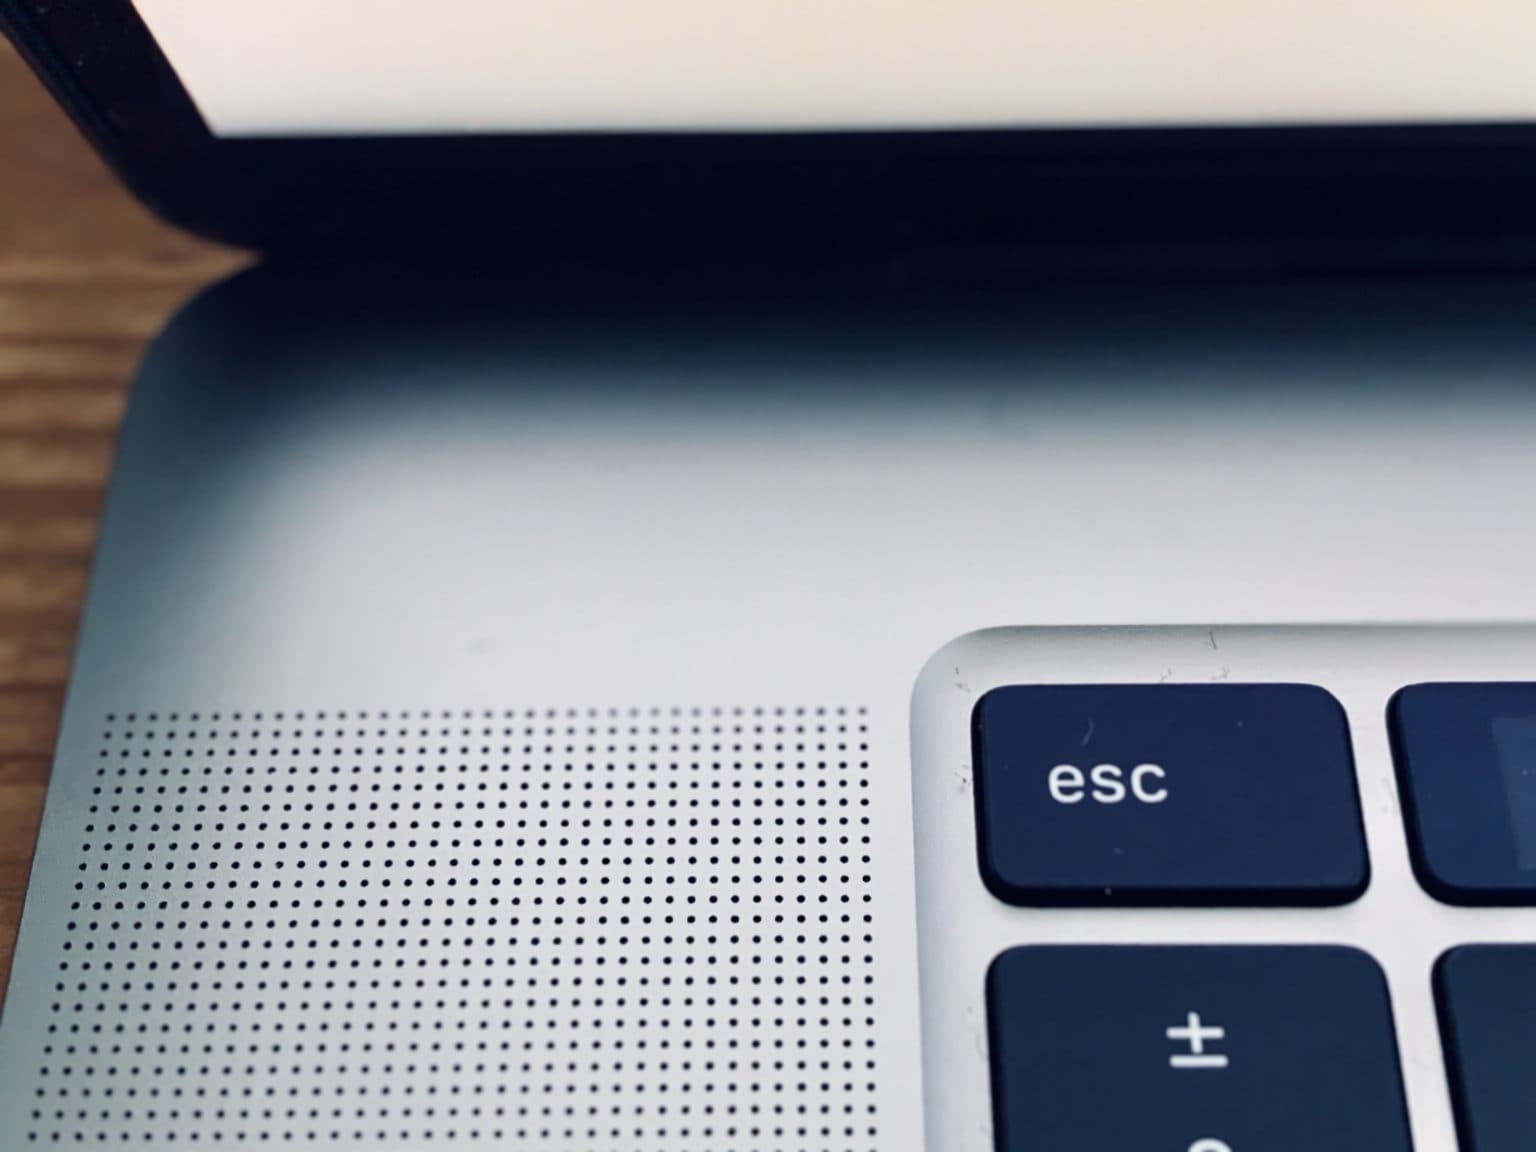 Apple added an Escape button, but broke the speakers. Find out how to fix MacBook Pro clicking speakers.